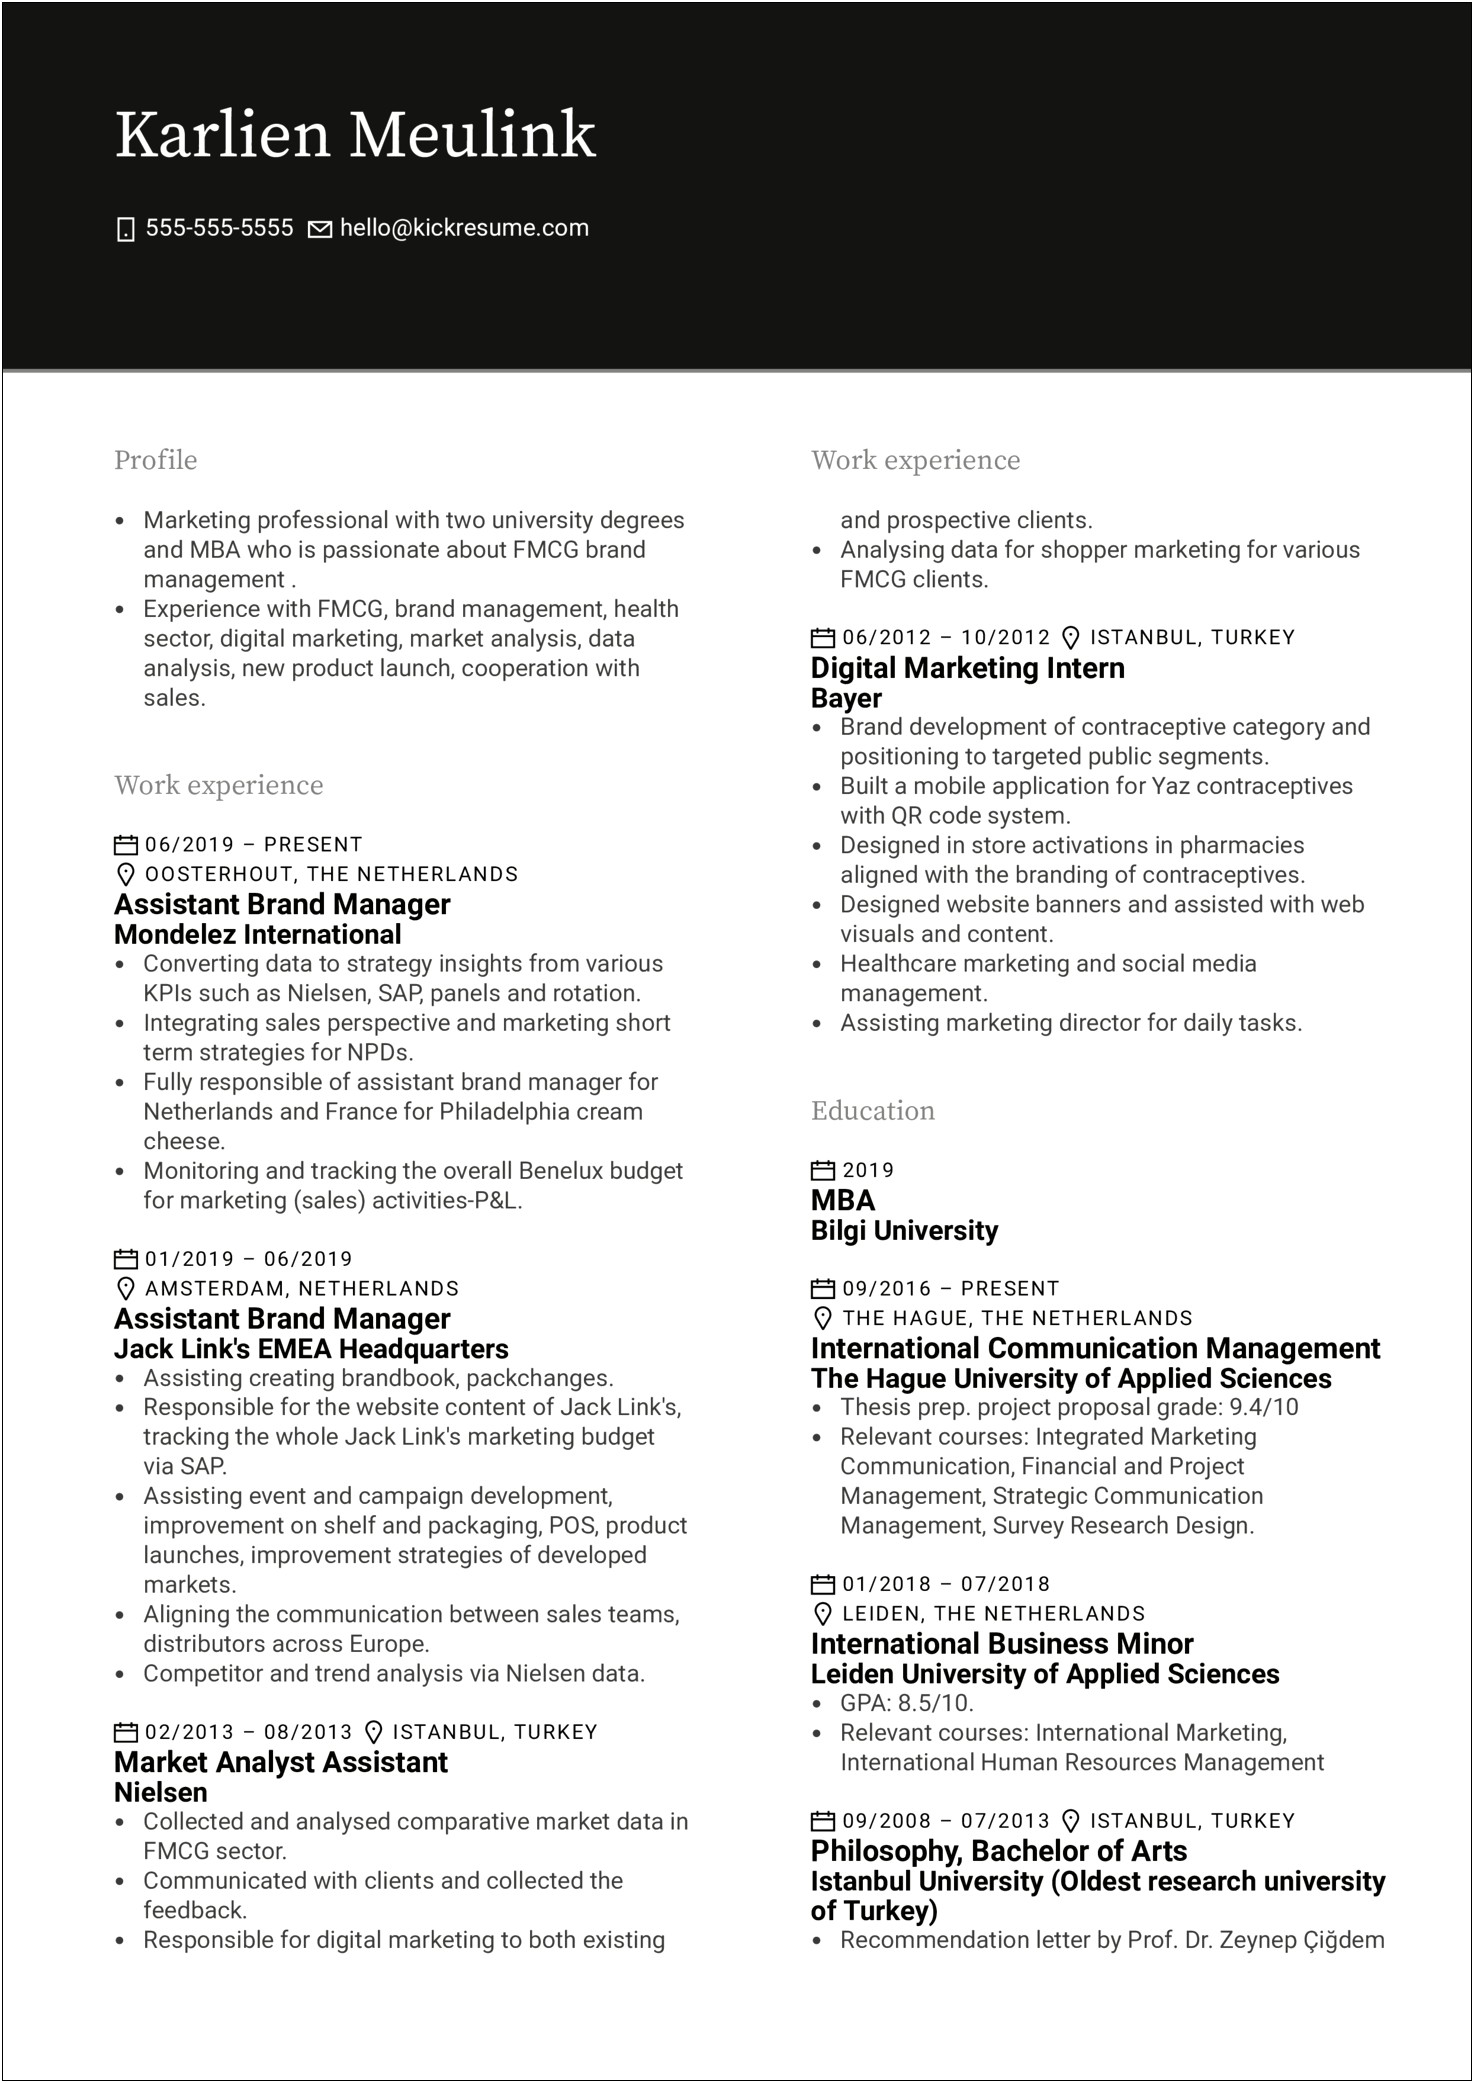 Resume Objective For Assistant Brand Manager